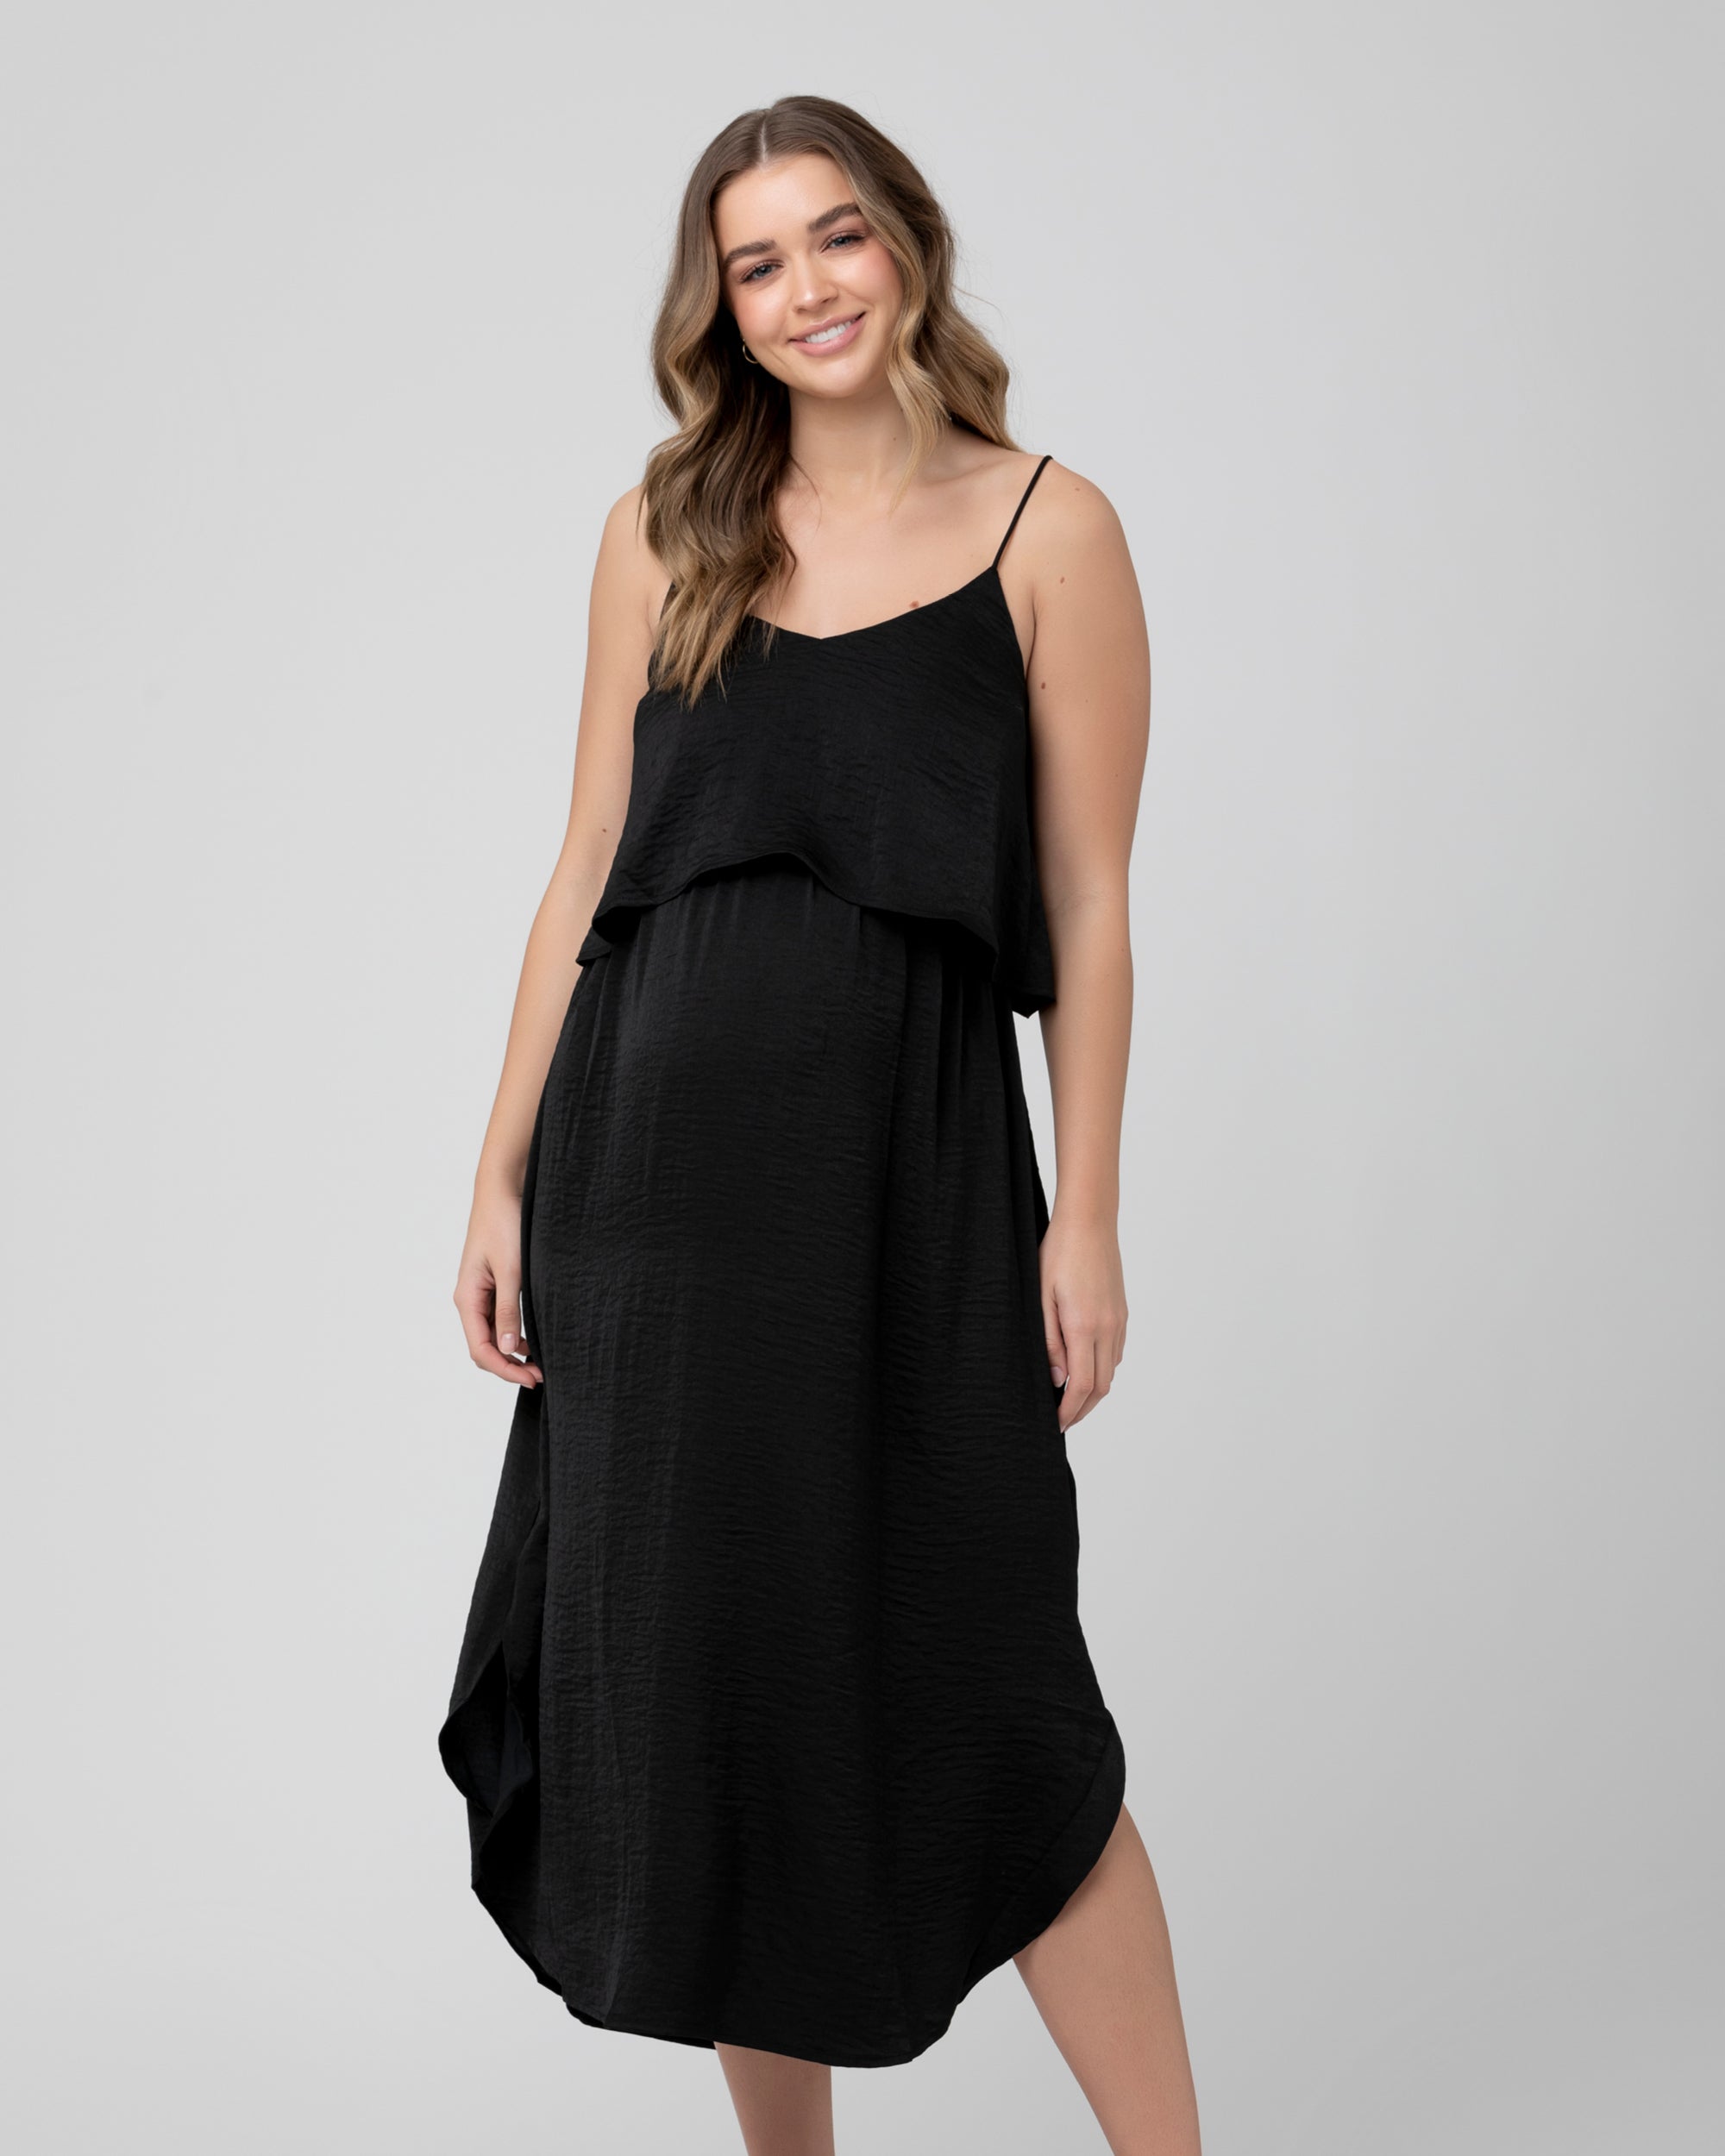 Maternity Clothes - Pregnancy Fashion Online